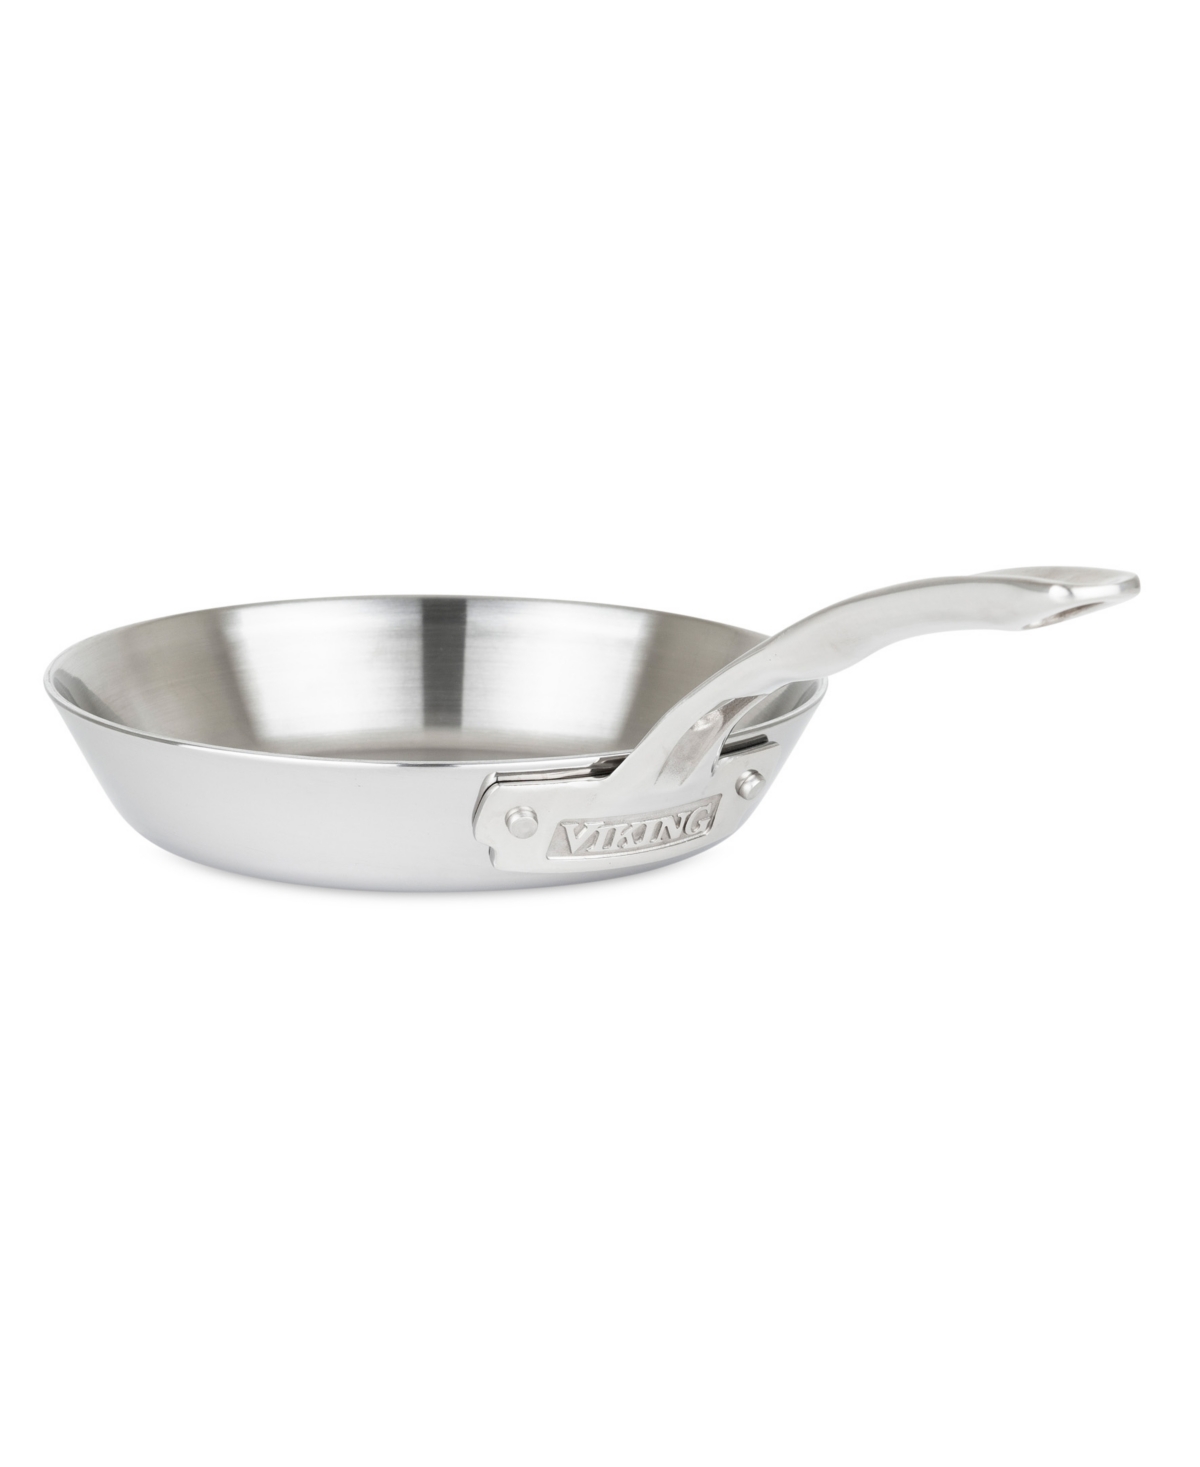 Viking Contemporary Fry Pan, 8" In Silver